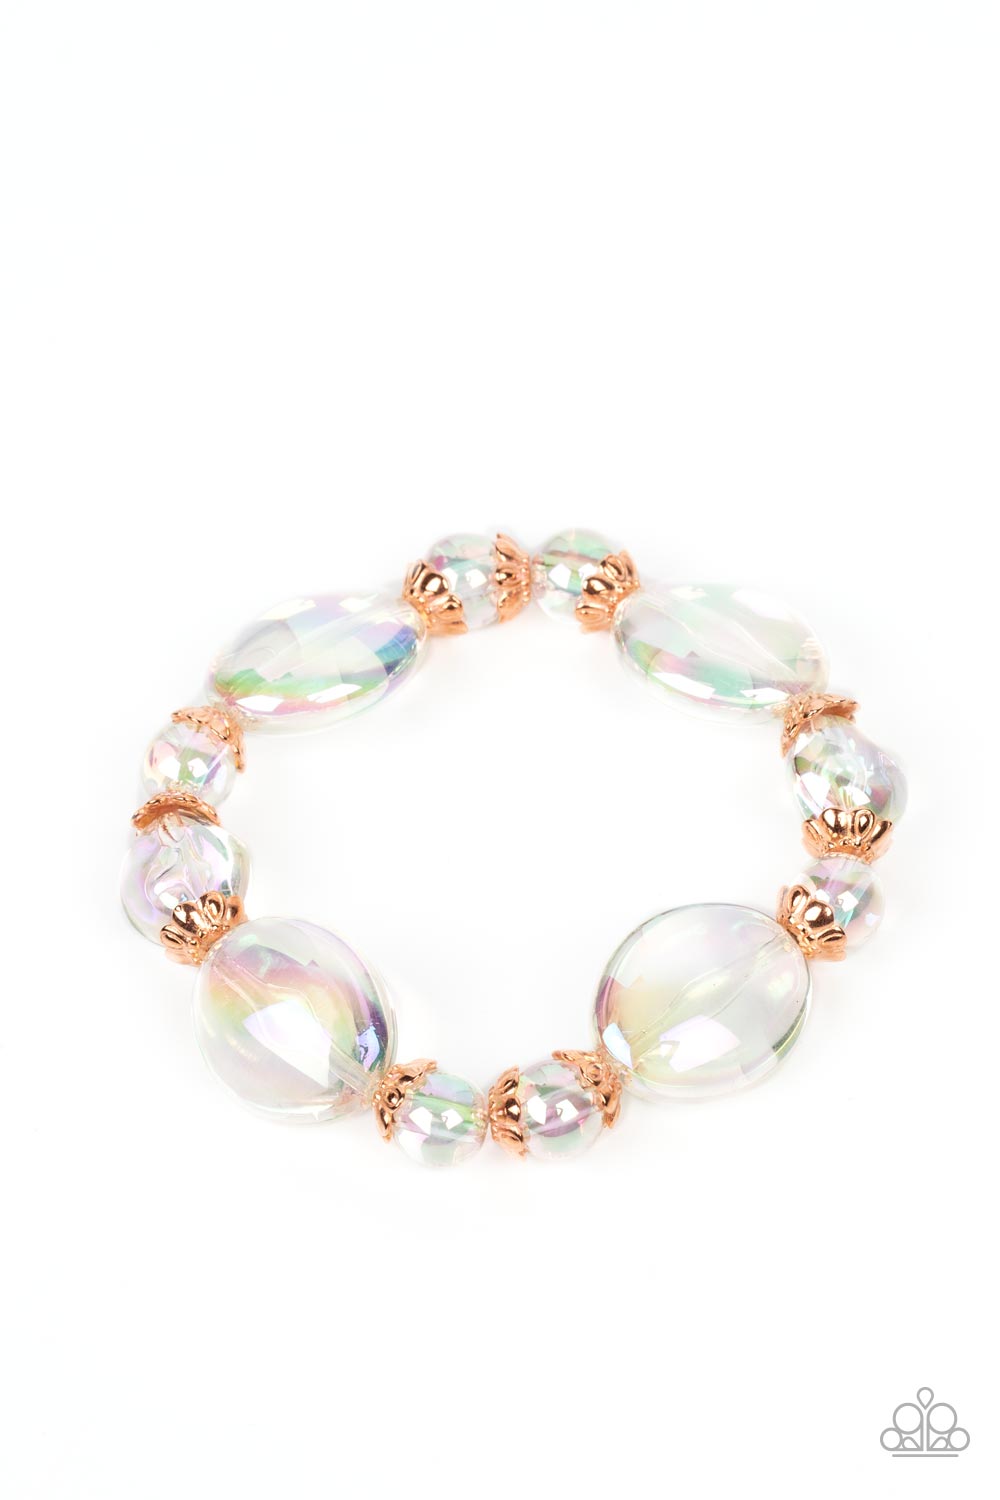 Iridescent Illusions - Copper Cap Fittings & Bubbly Iridescent Beaded Paparazzi Stretch Bracelet